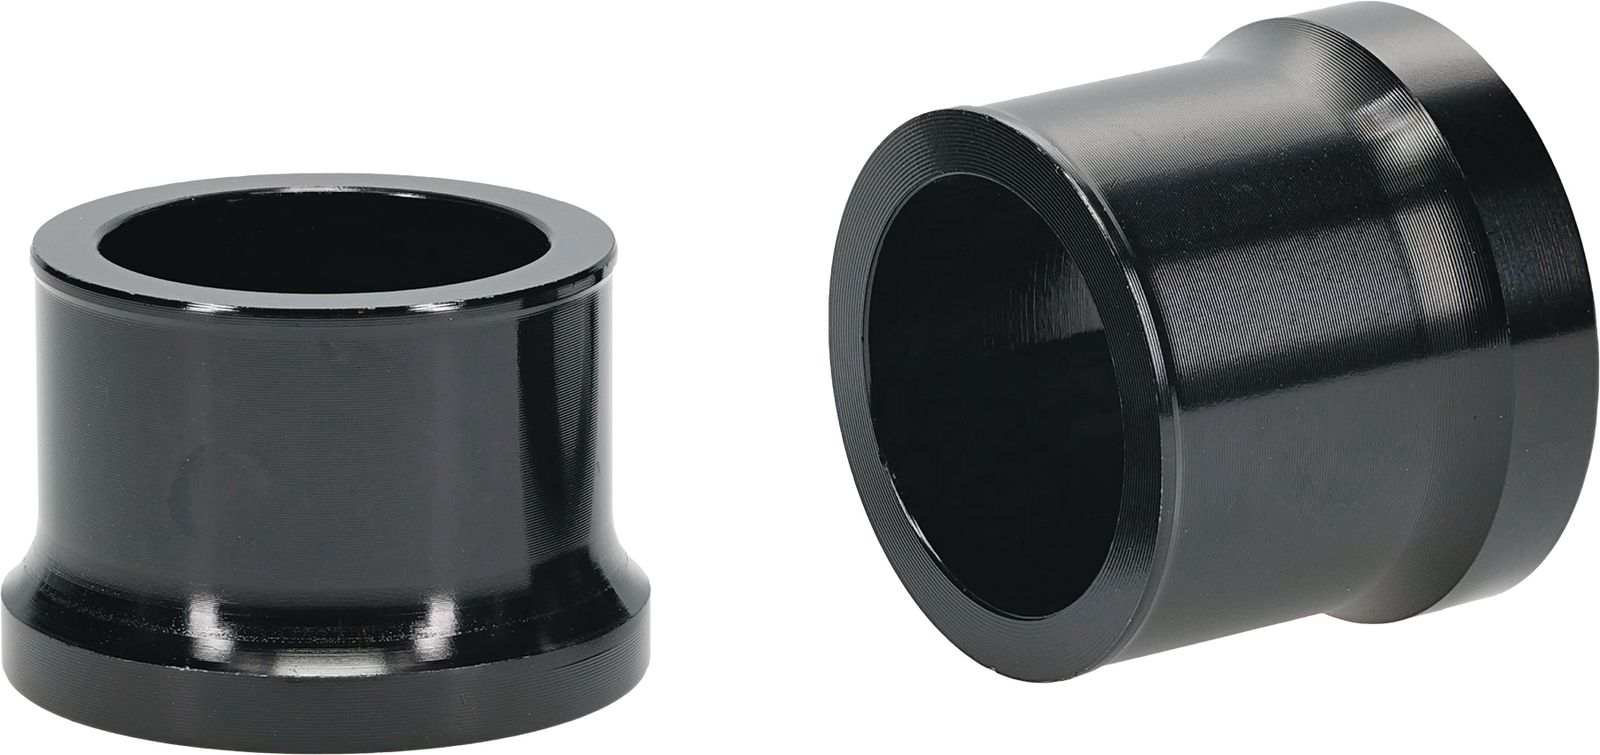 Wrp Front Wheel Spacer Kits - WRP111070 image